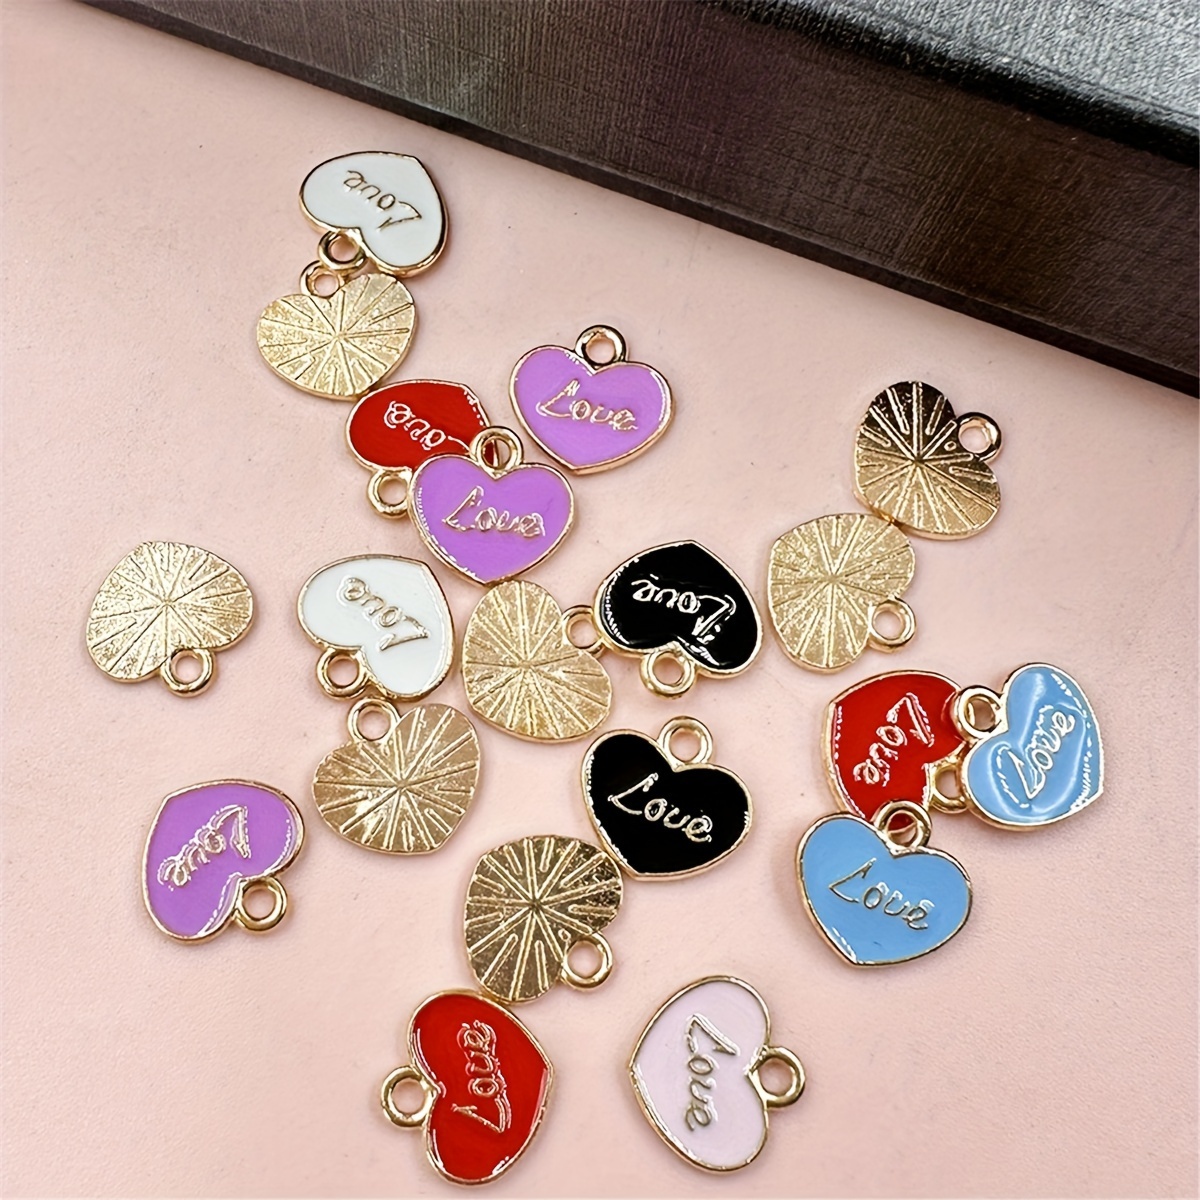 20pcs/pack 11.8*11.4mm Alloy Dripping Oil Heart Pendant Enamel Charms Bulk Necklace Bracelet Accessories Couple Jewelry DIY Material Small Business